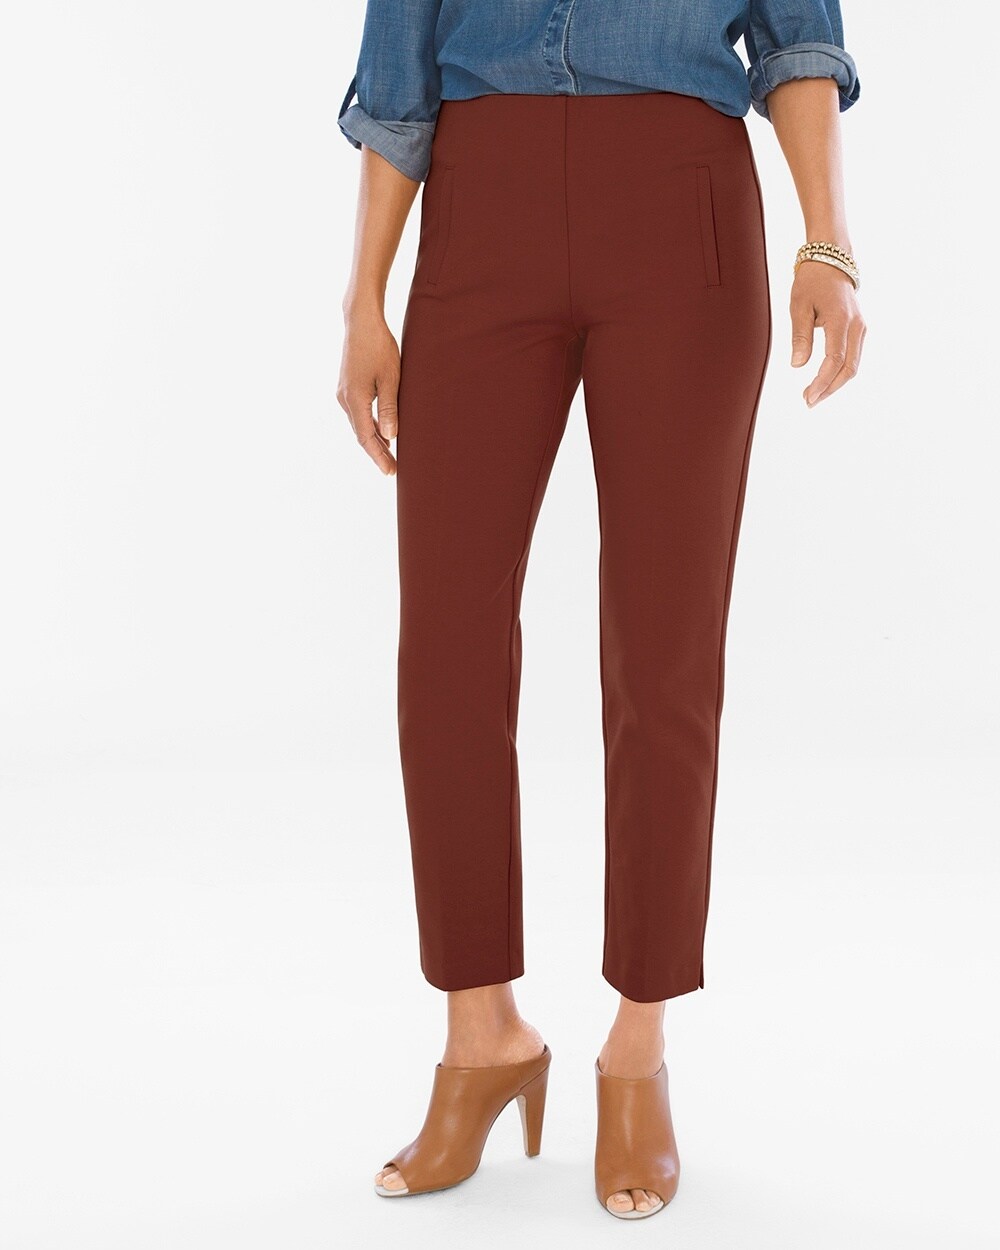 Juliet Ankle Pants in Rich Mahogany- NLA please see 570210761